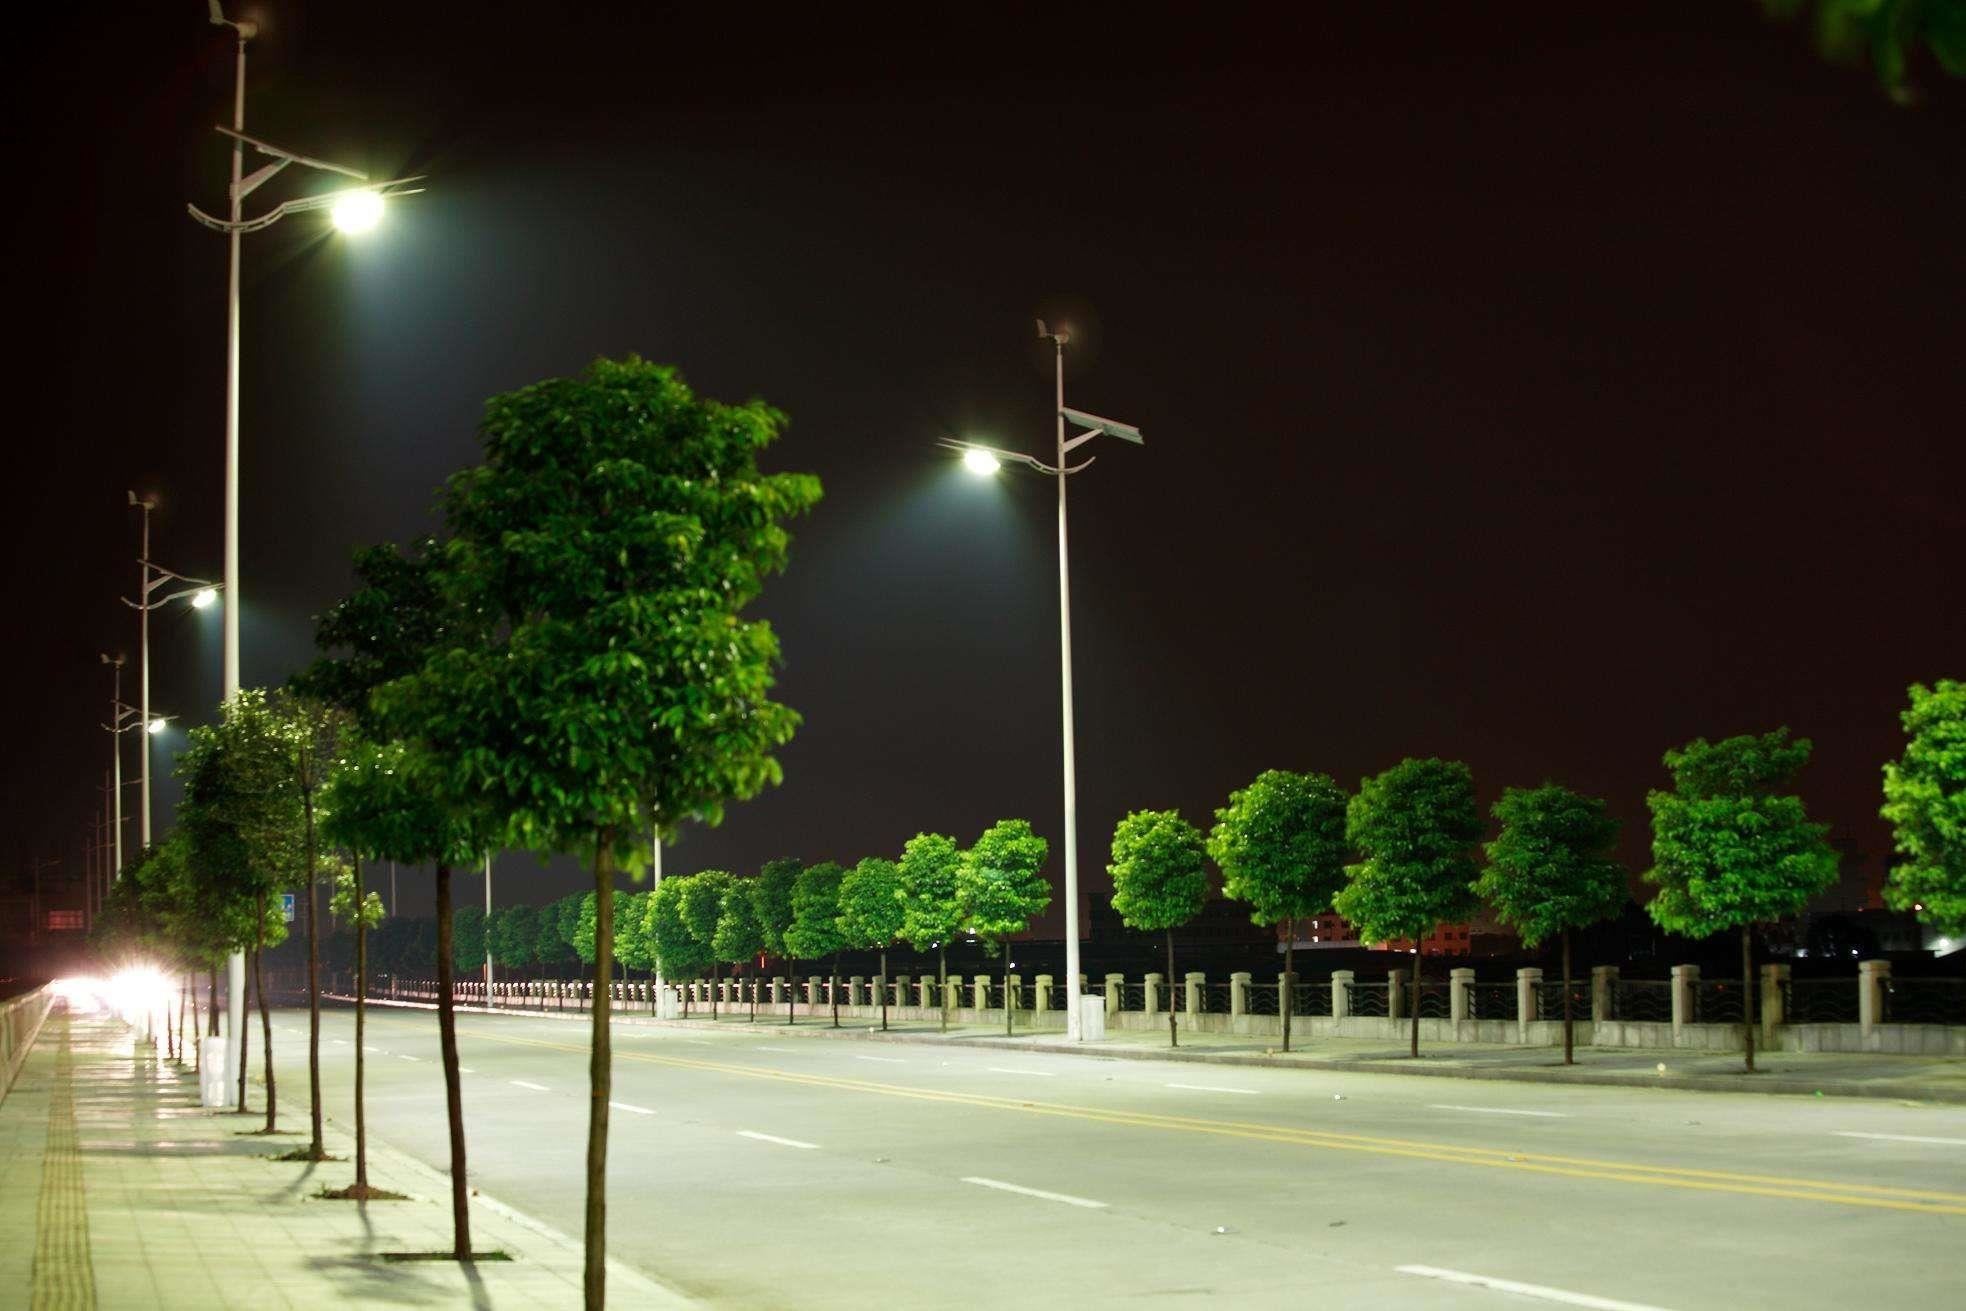 What are the possible failures of LED street lights? How to prevent it?